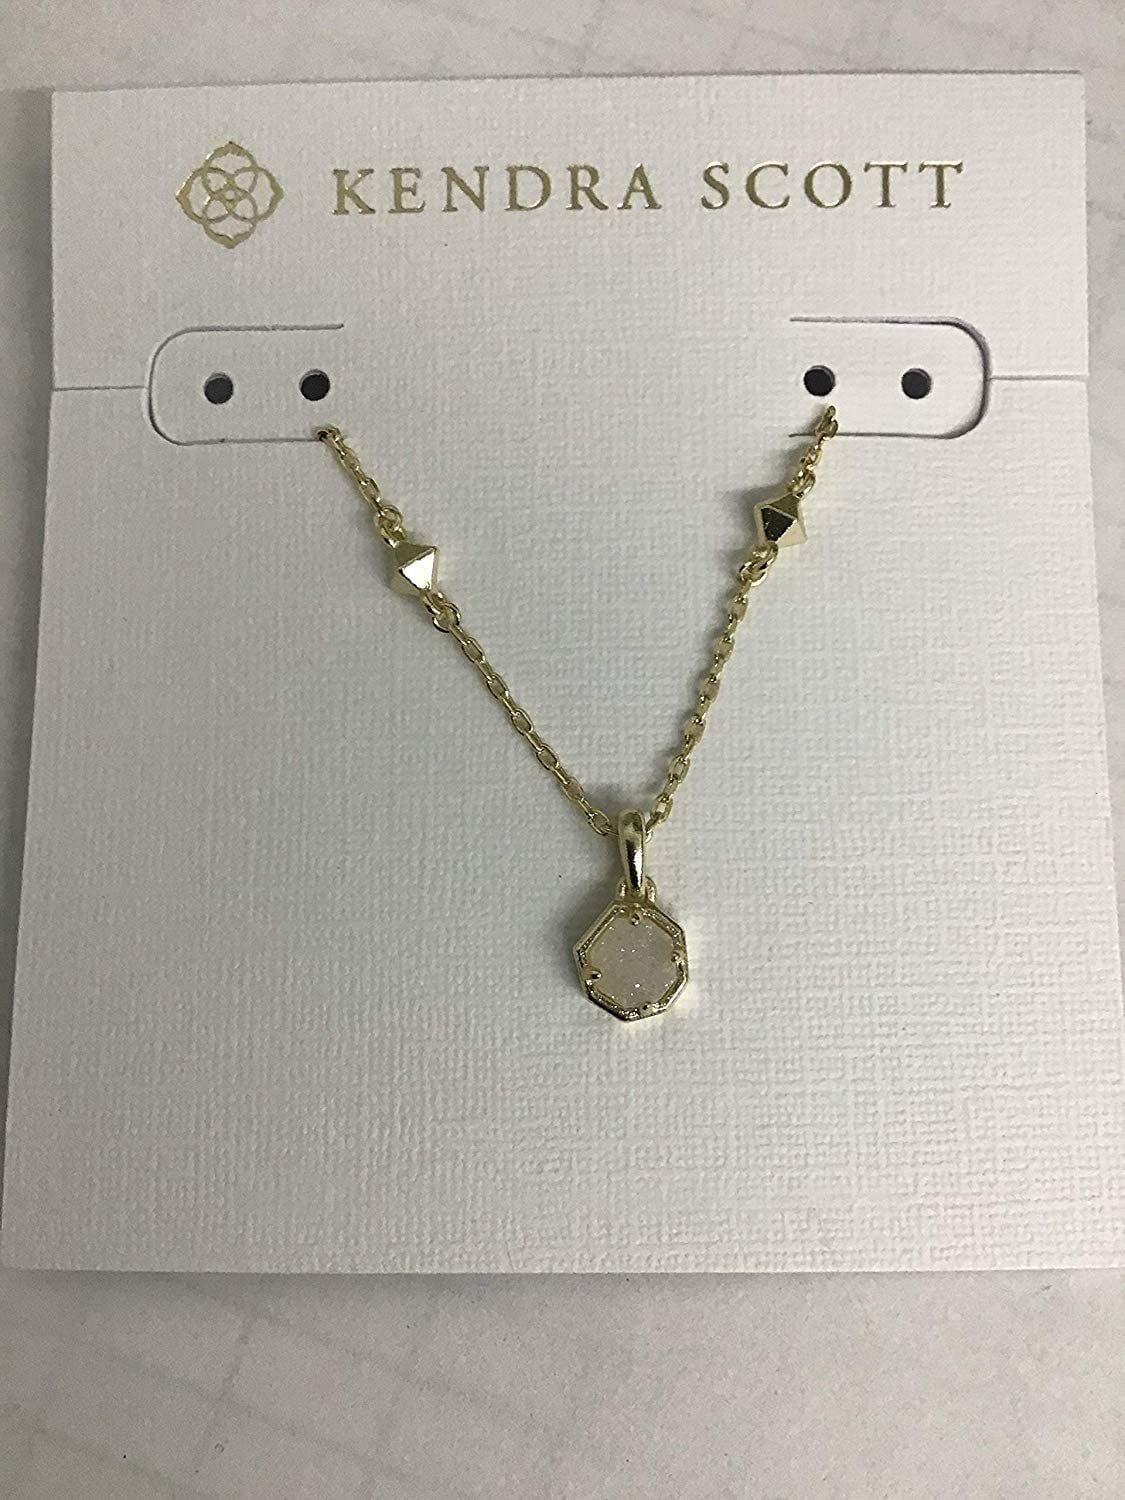 Kendra Scott Nola Gold Pendant Necklace in Red Illusion - ShopStyle